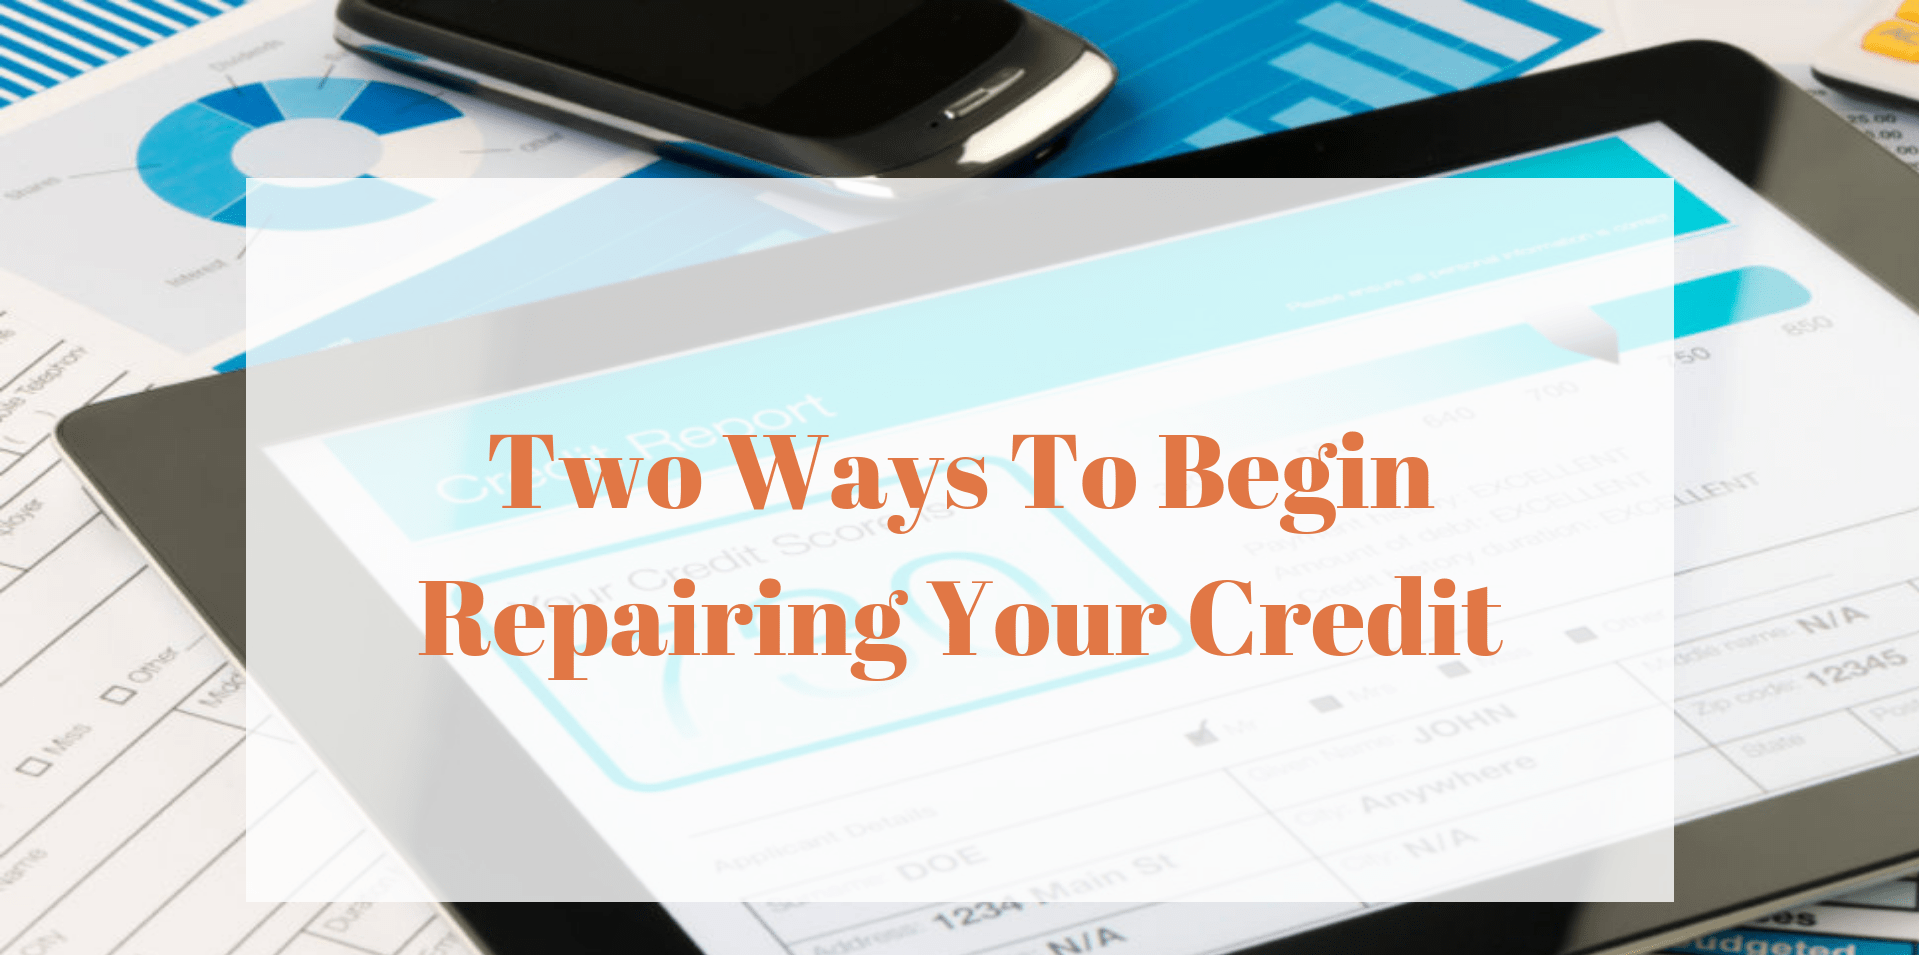 Two Ways To Begin Repairing Your Credit